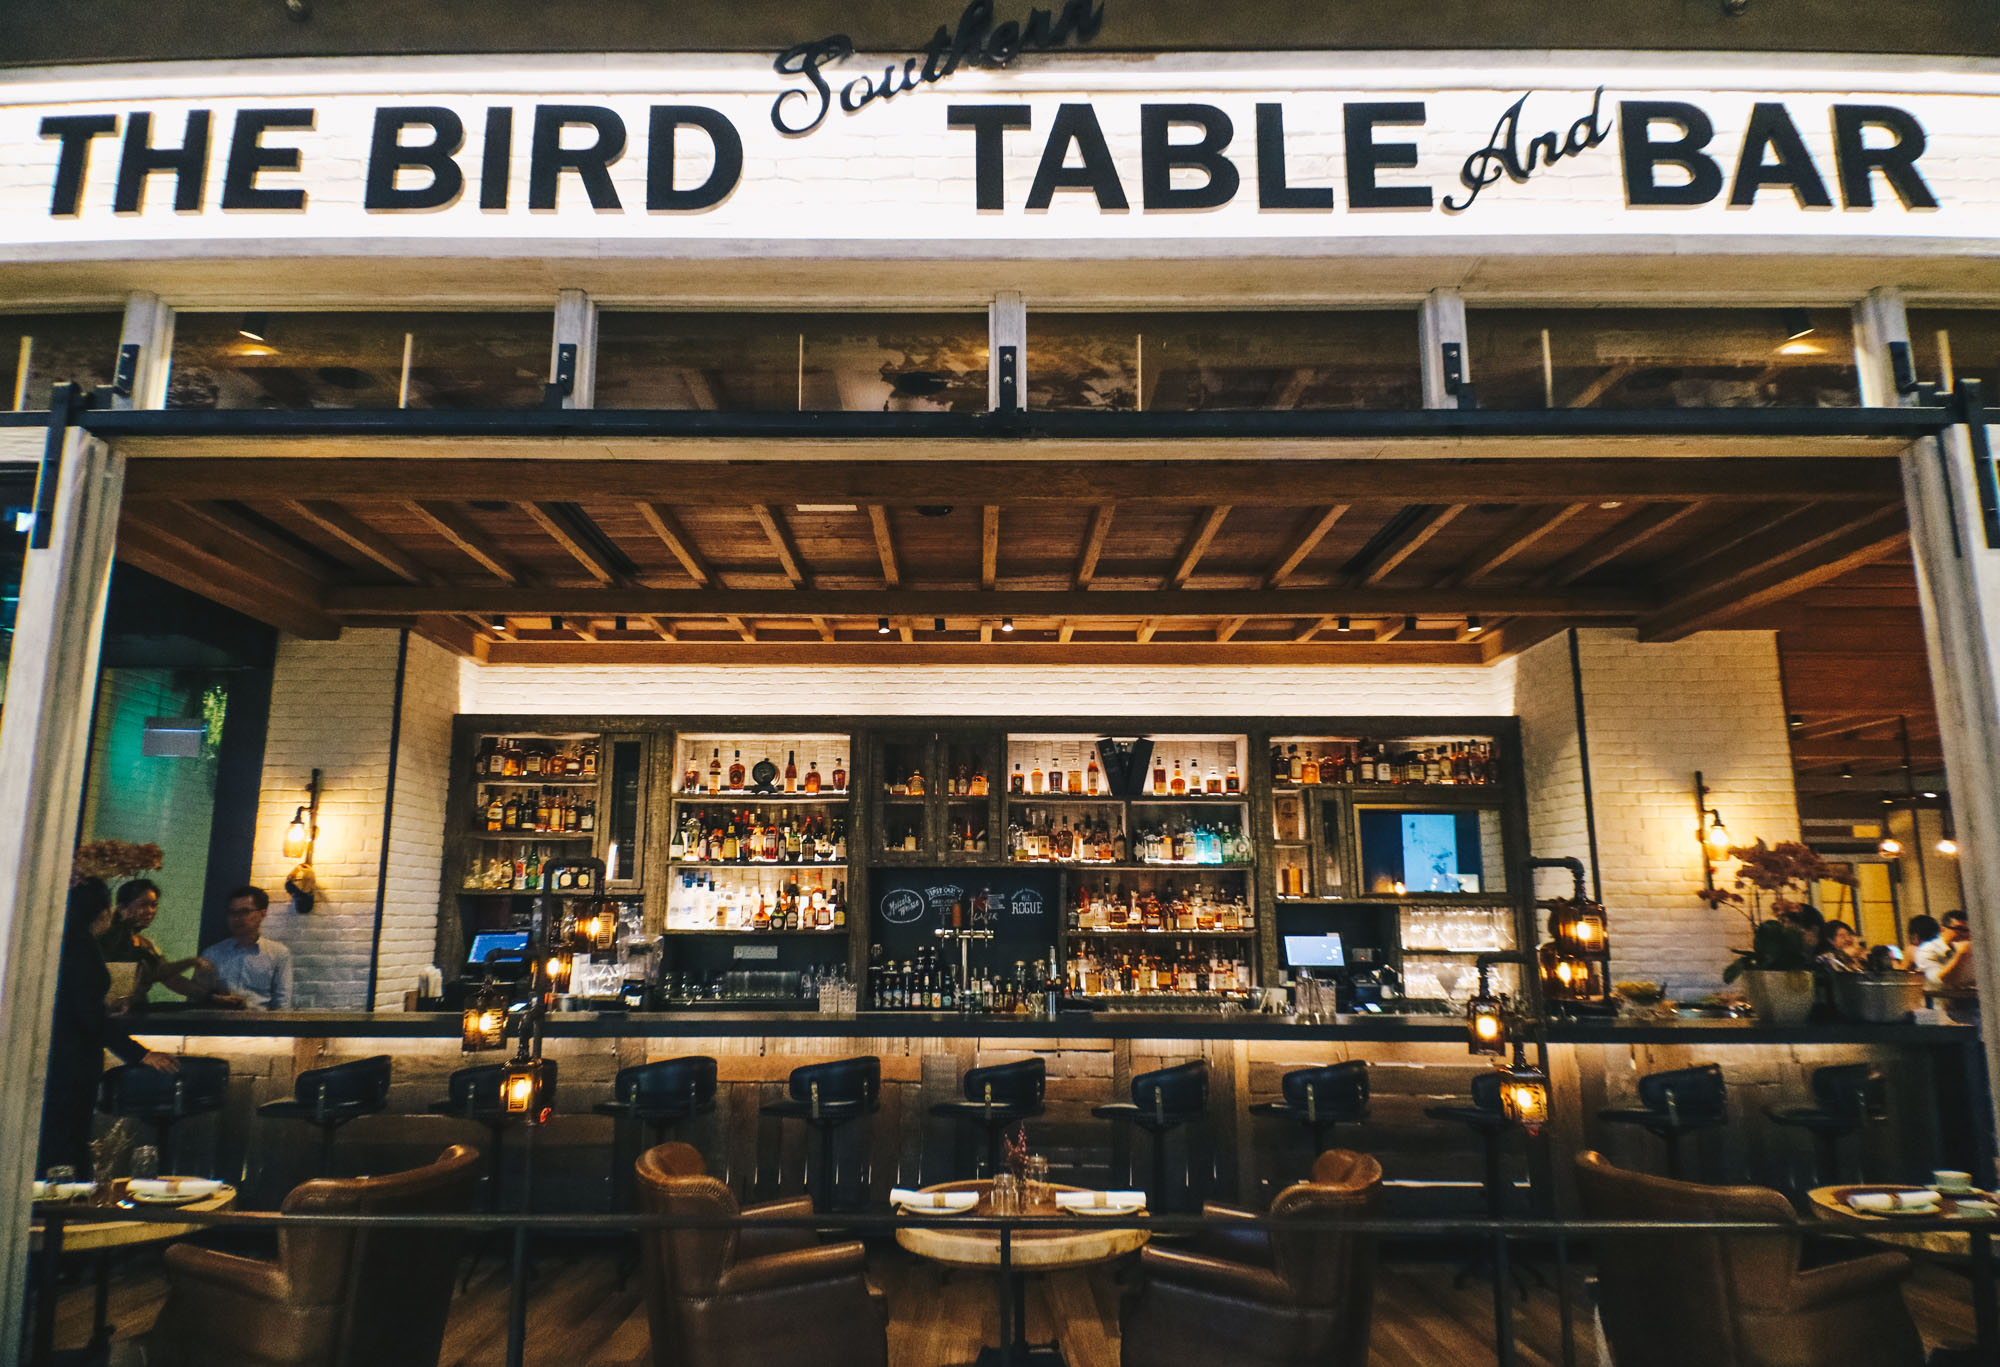 The Bird Southern Table And Bar - Southern Soul Food - Darren Bloggie 達人的部落格